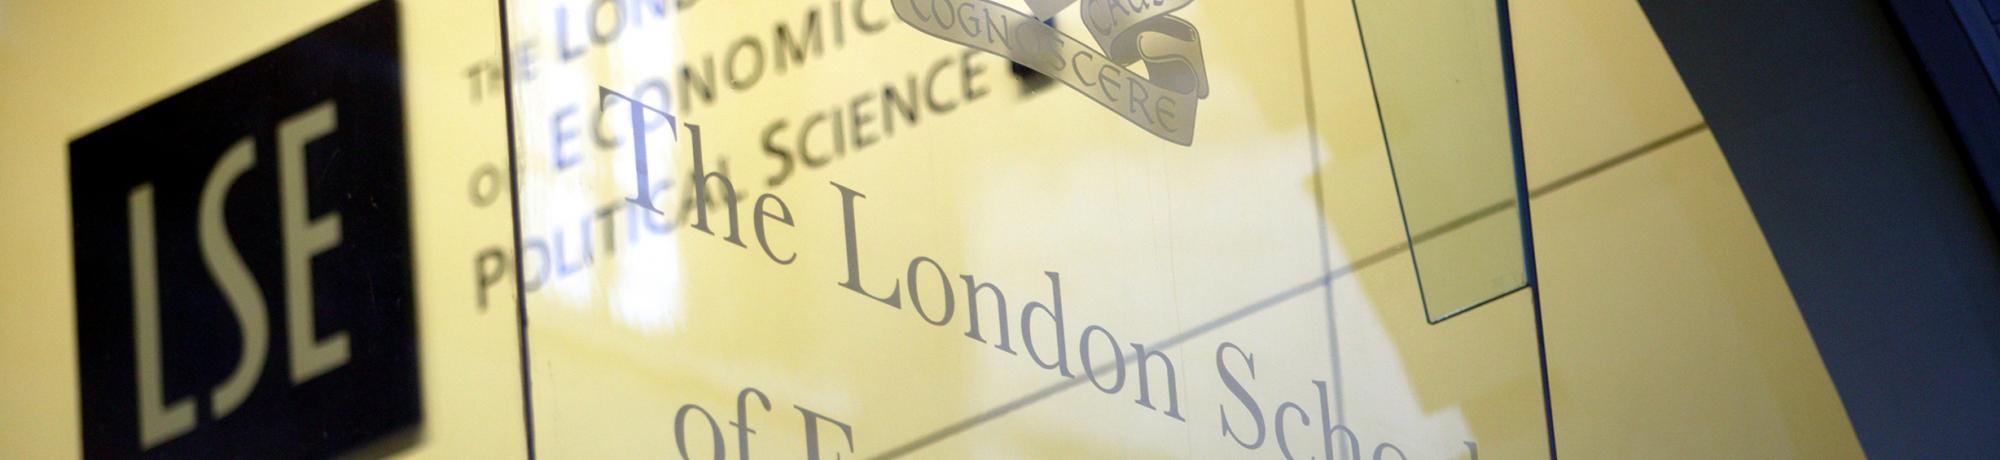 UC Davis Study Abroad, Quarter Abroad UK, Political Science at the London School of Economics Program, Header Image, Overview Page